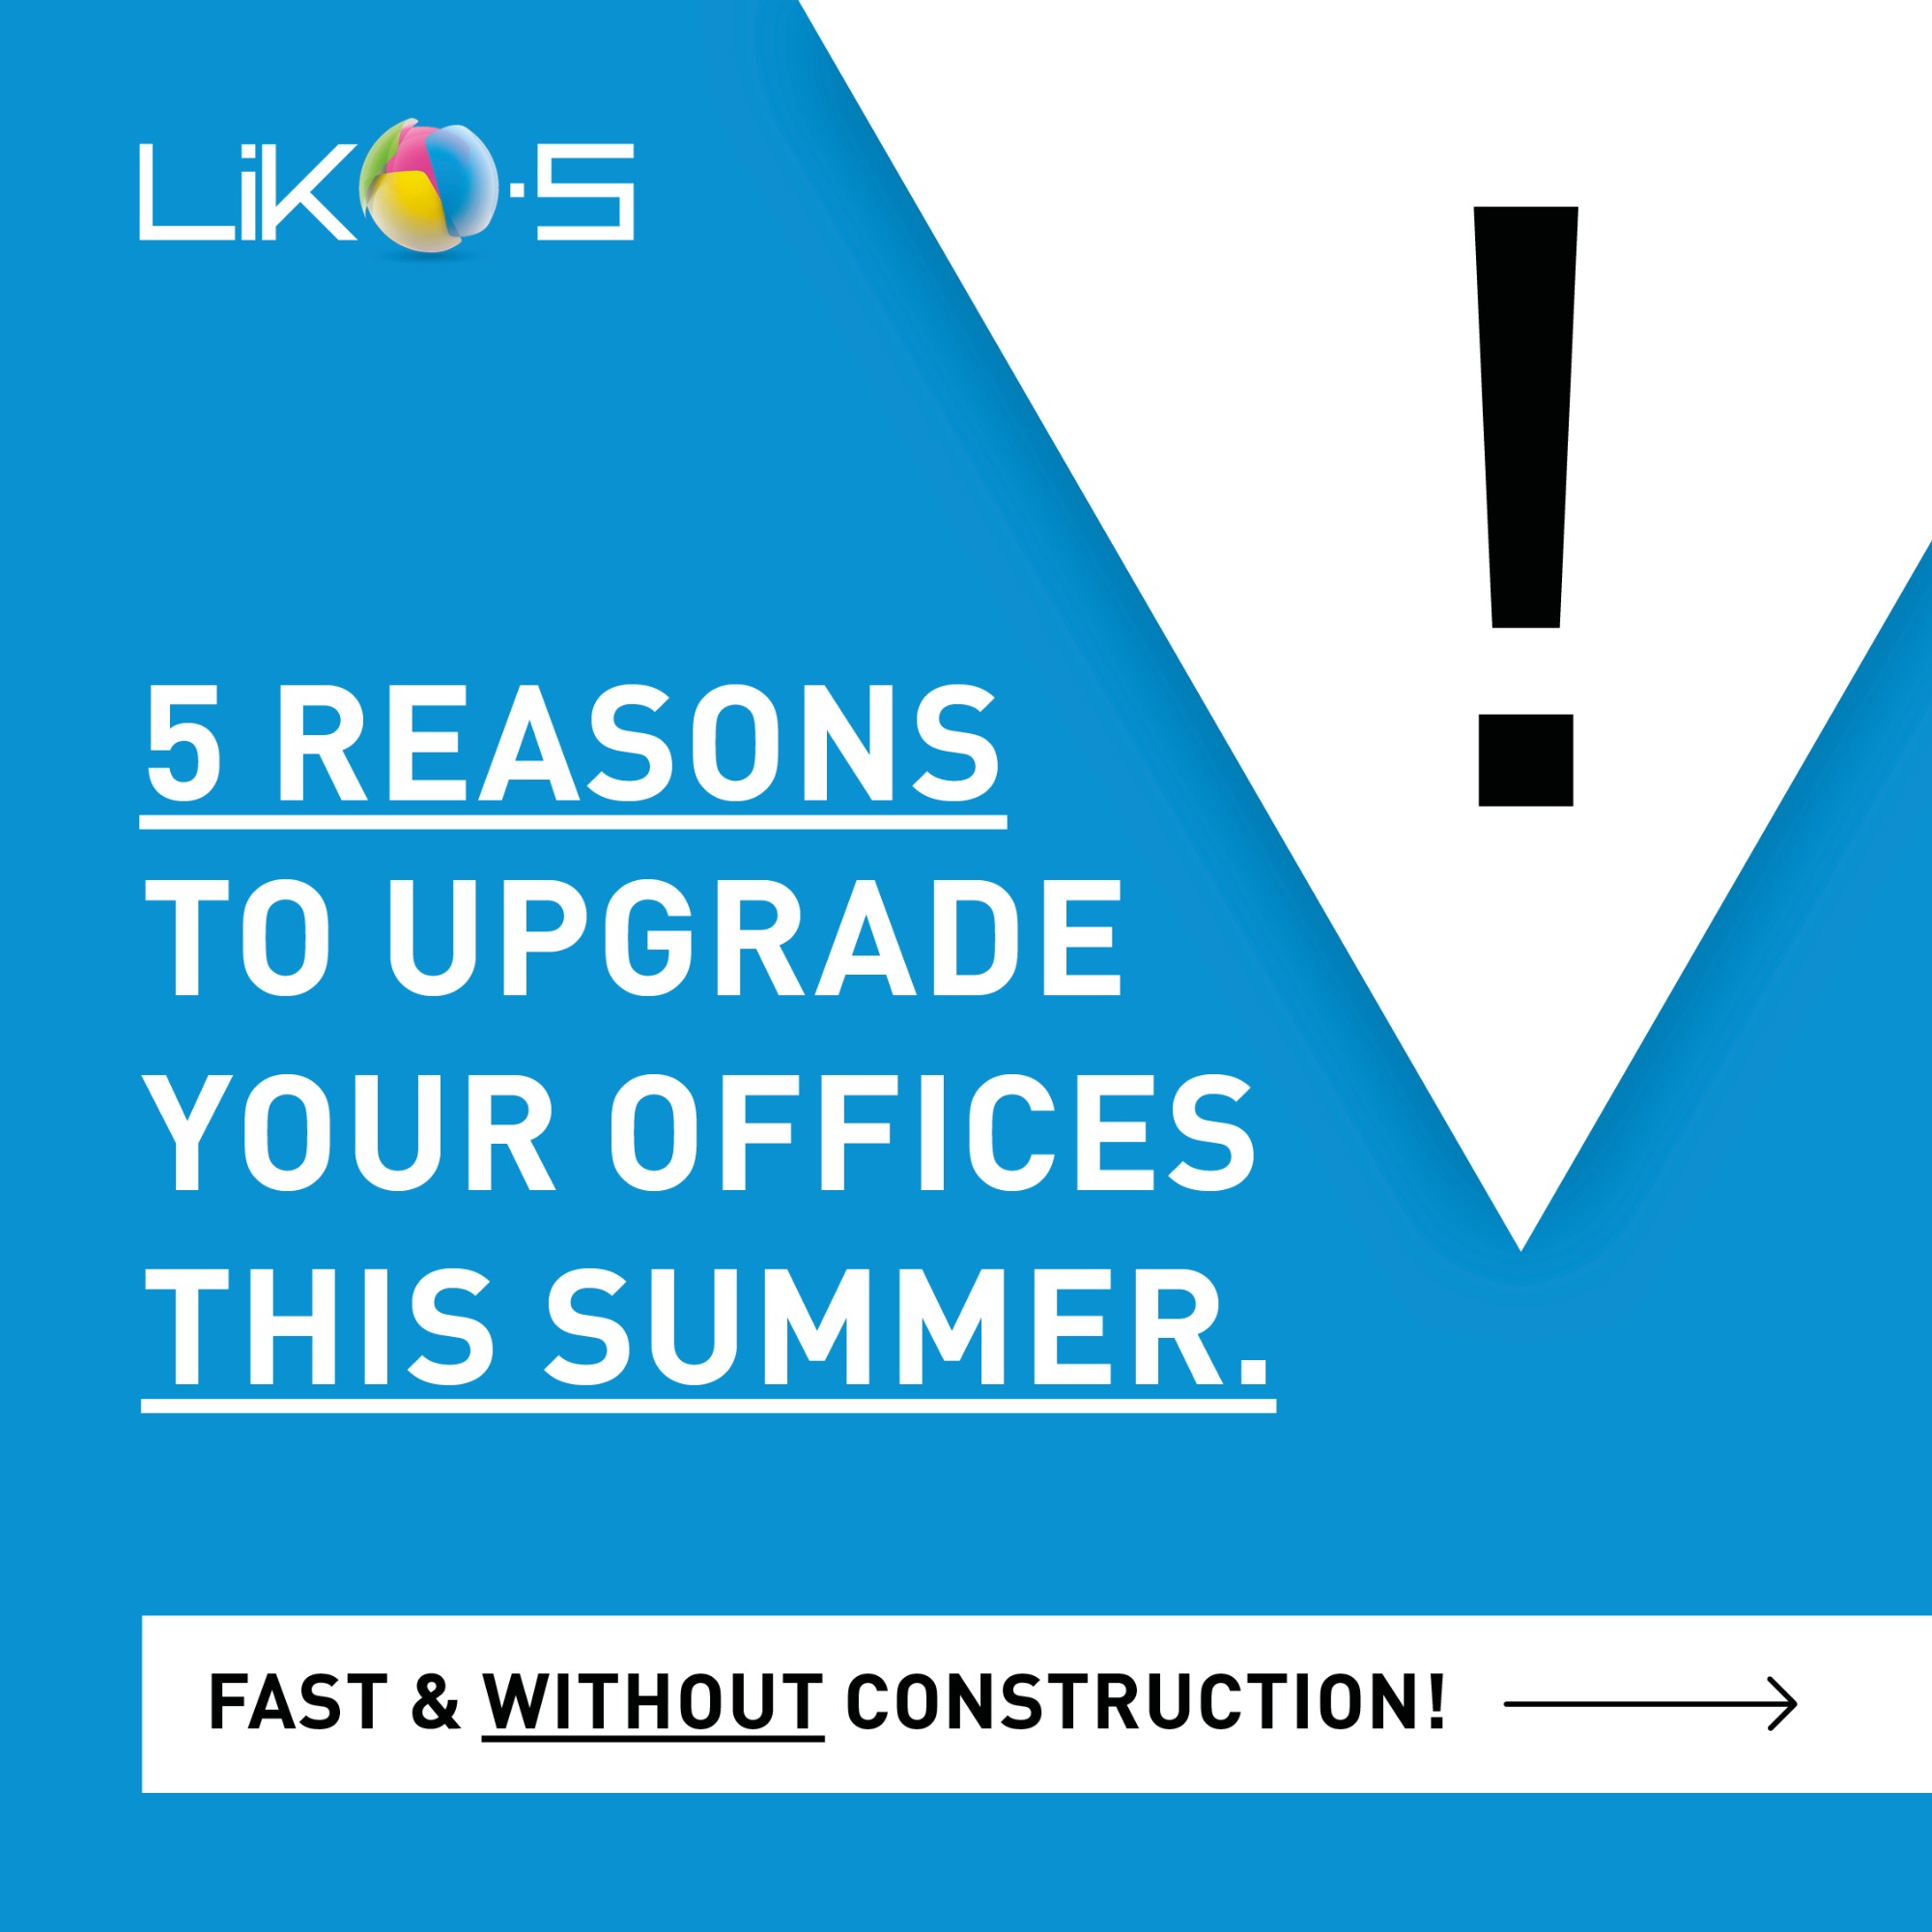 5 reasons to upgrade your offices this summer